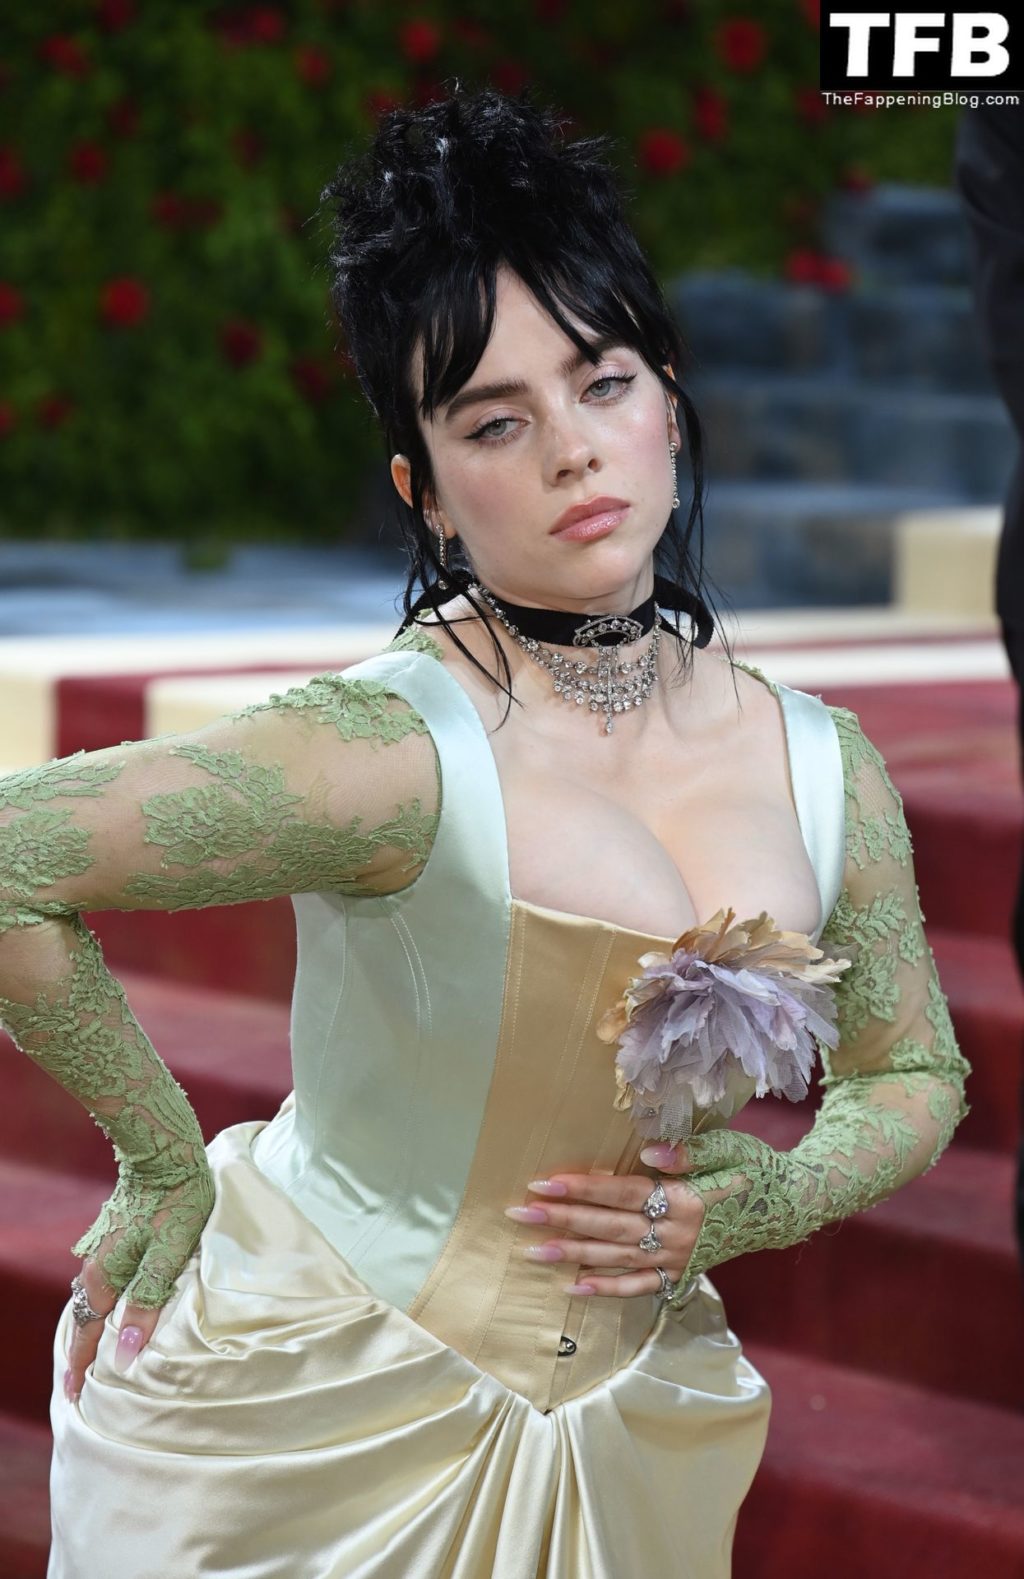 Billie Eilish Sexy The Fappening Blog 97 1024x1579 - Billie Eilish Showcases Nice Cleavage at The 2022 Met Gala in NYC (155 Photos)